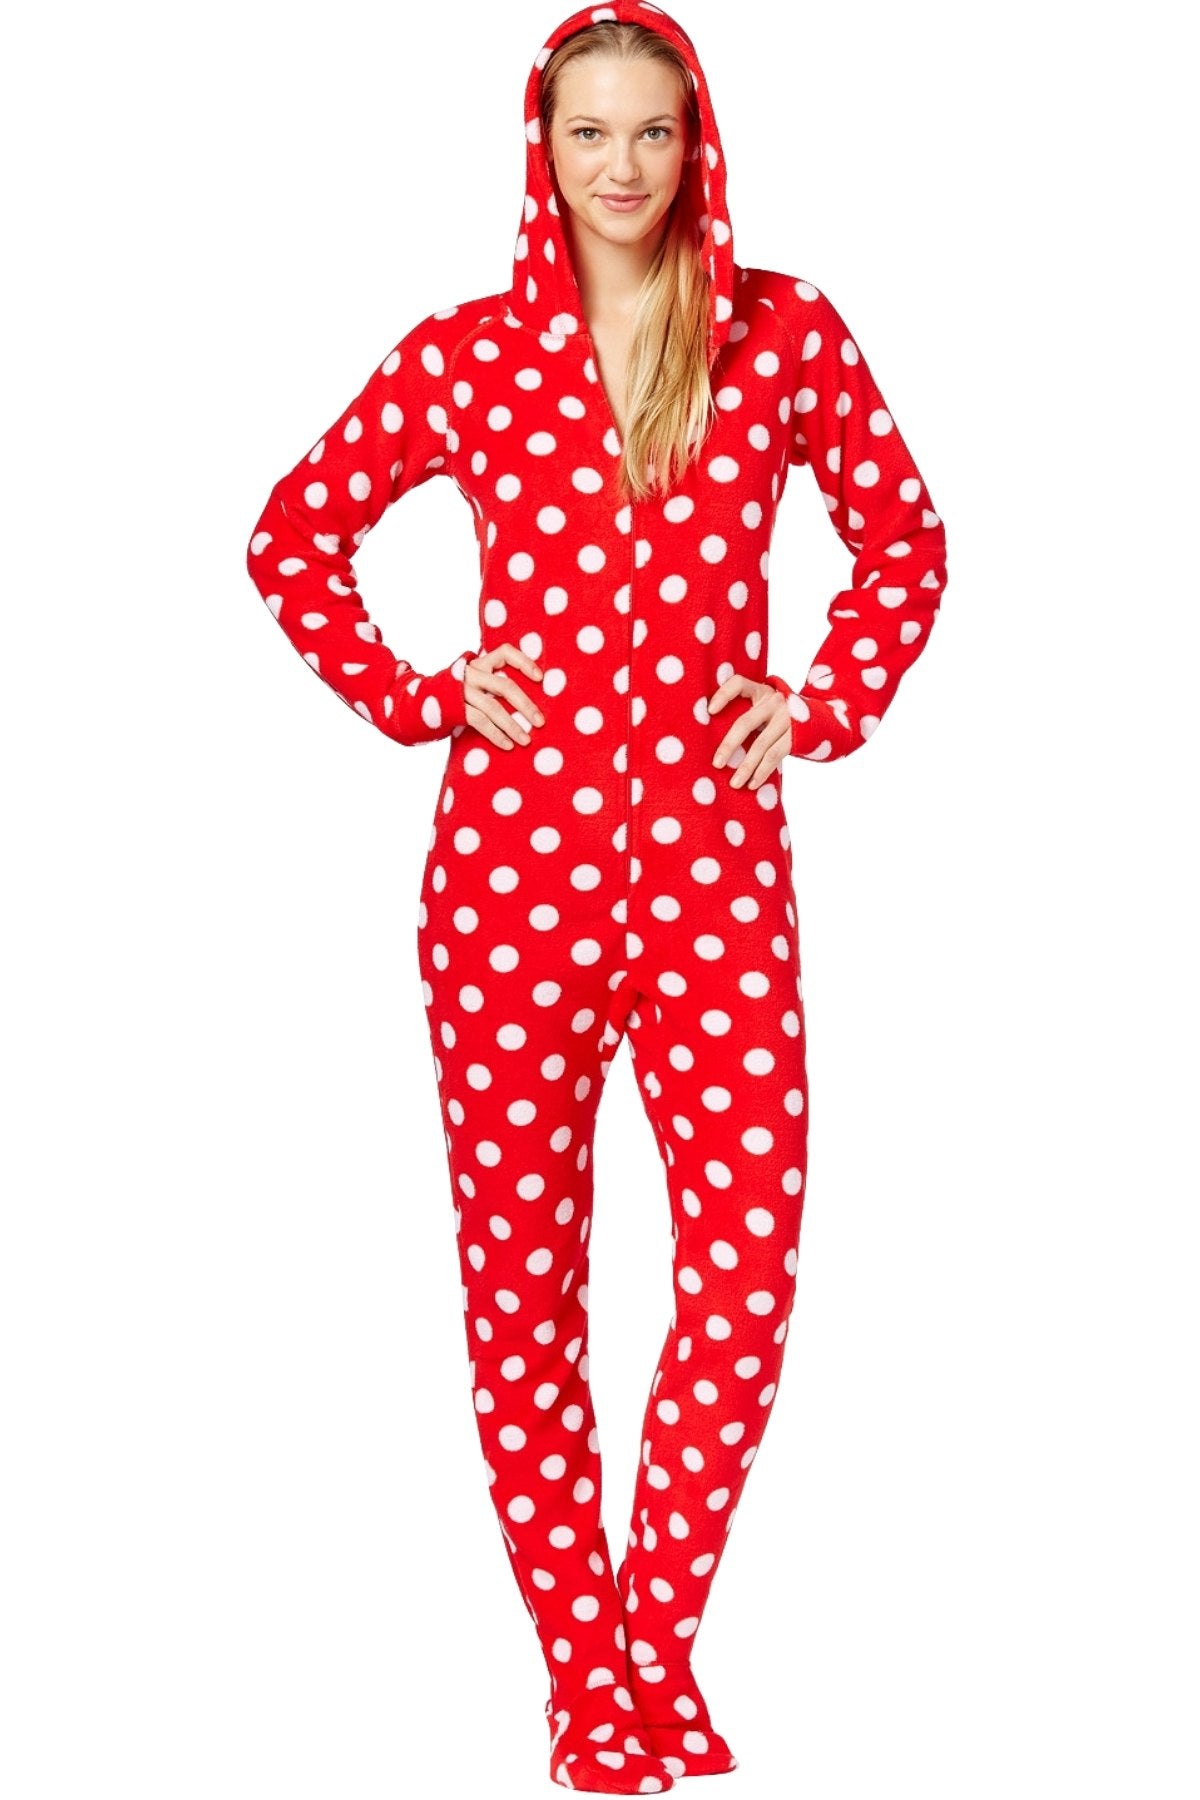 Jenni By Jennifer Moore Red Big-Dots Hooded/Footed Printed Pajama Jumpsuit